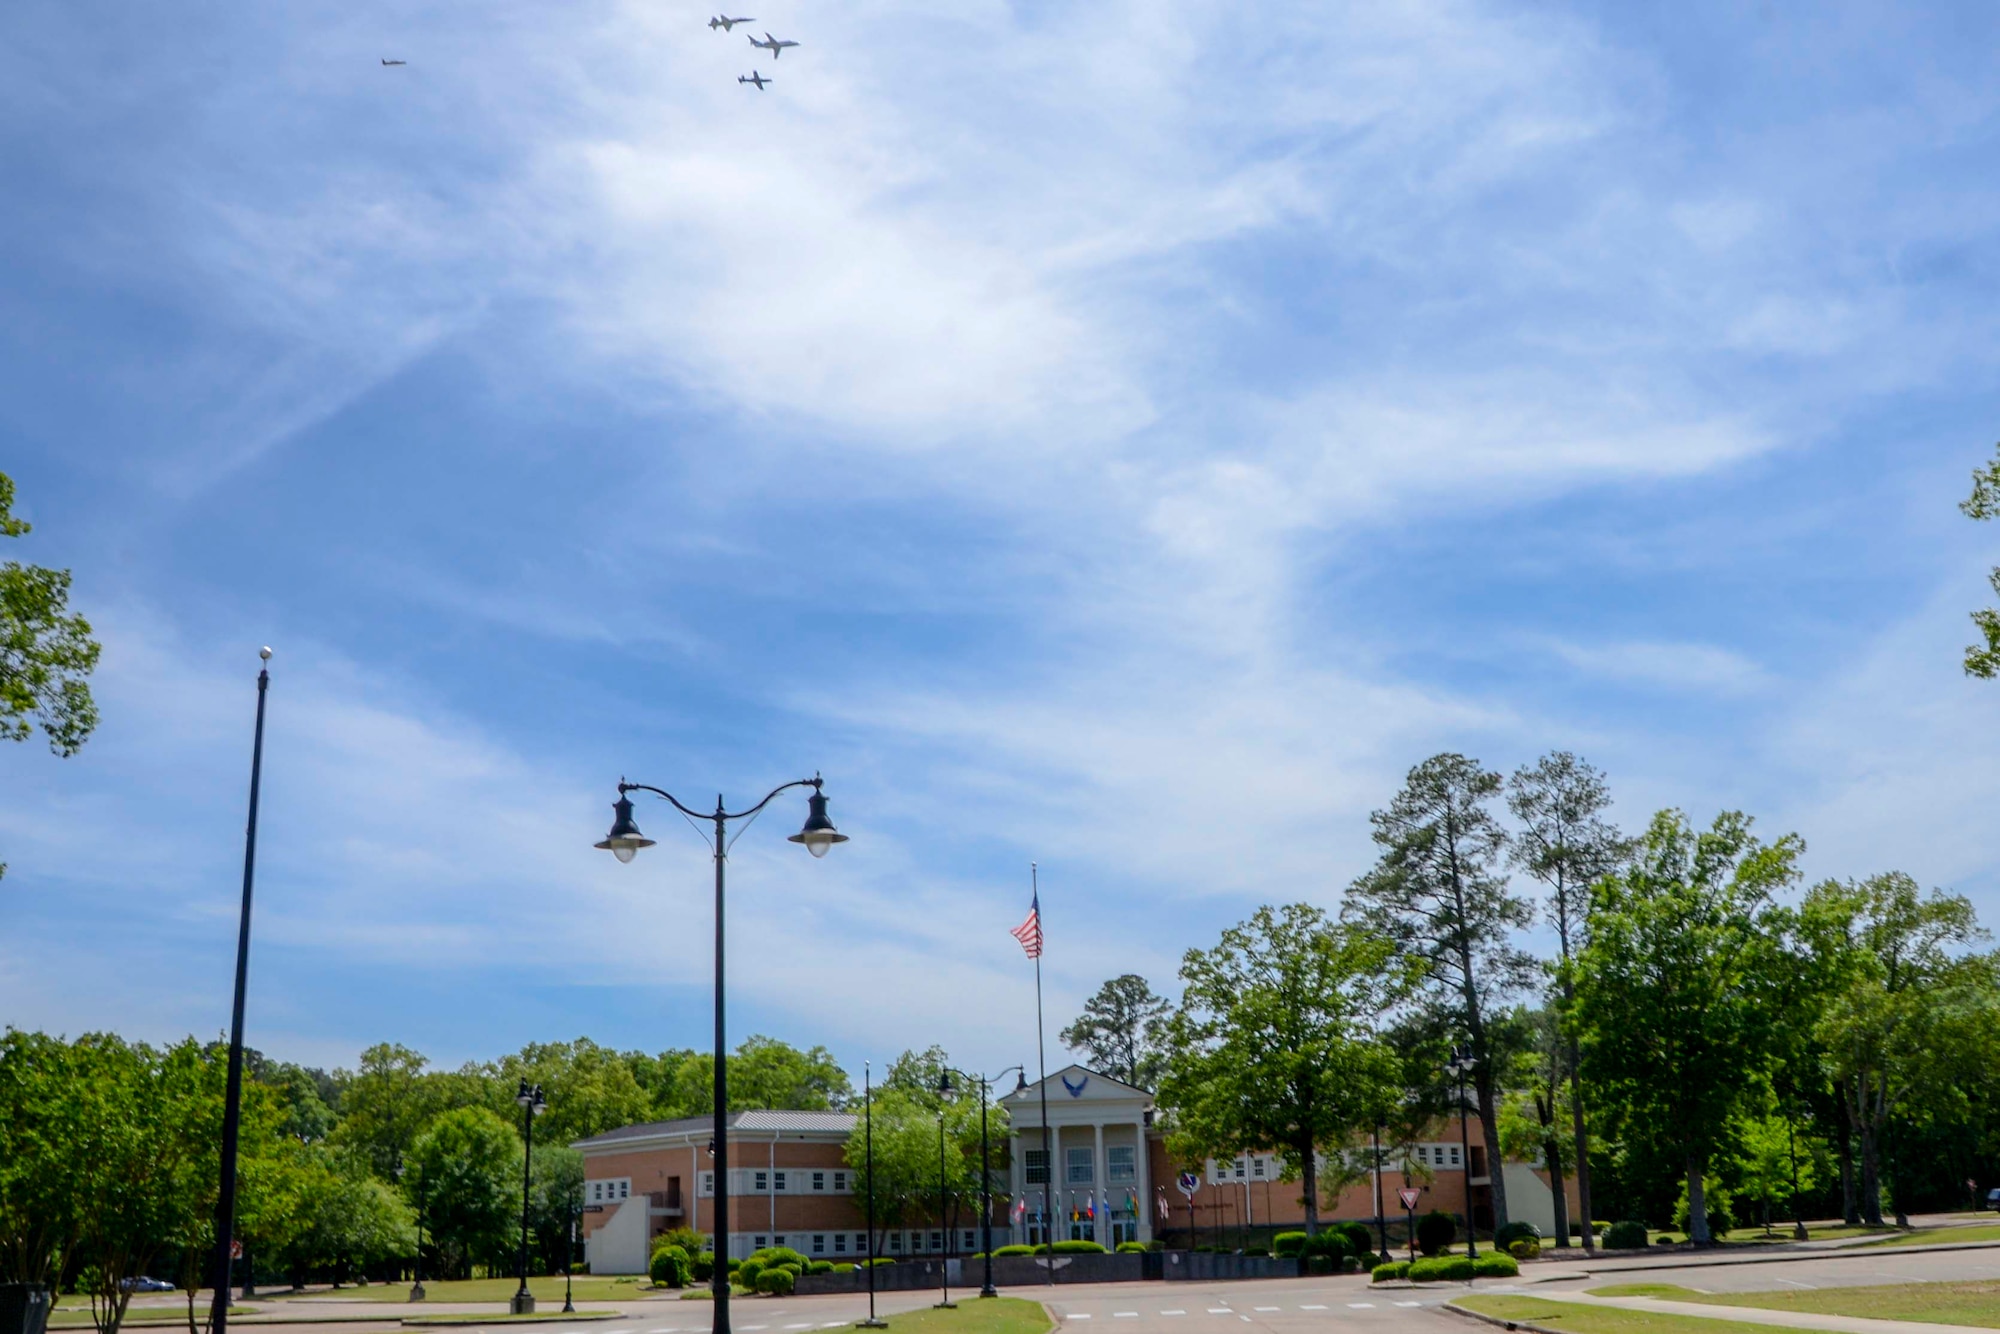 A dissimilar formation of aircraft from Columbus Air Force Base, Miss., fly over Columbus AFB May 9, 2020. The flyover was an opportunity to honor the men and women on the front lines in the fight against COVID-19 during the Defense Department’s #AmericaStrong salute. The flyover consisted of the T-6A Texan II, T-1A Jayhawk and the T-38 Talon. (U.S. Air Force photo by Tech. Sgt. Christopher Gross)